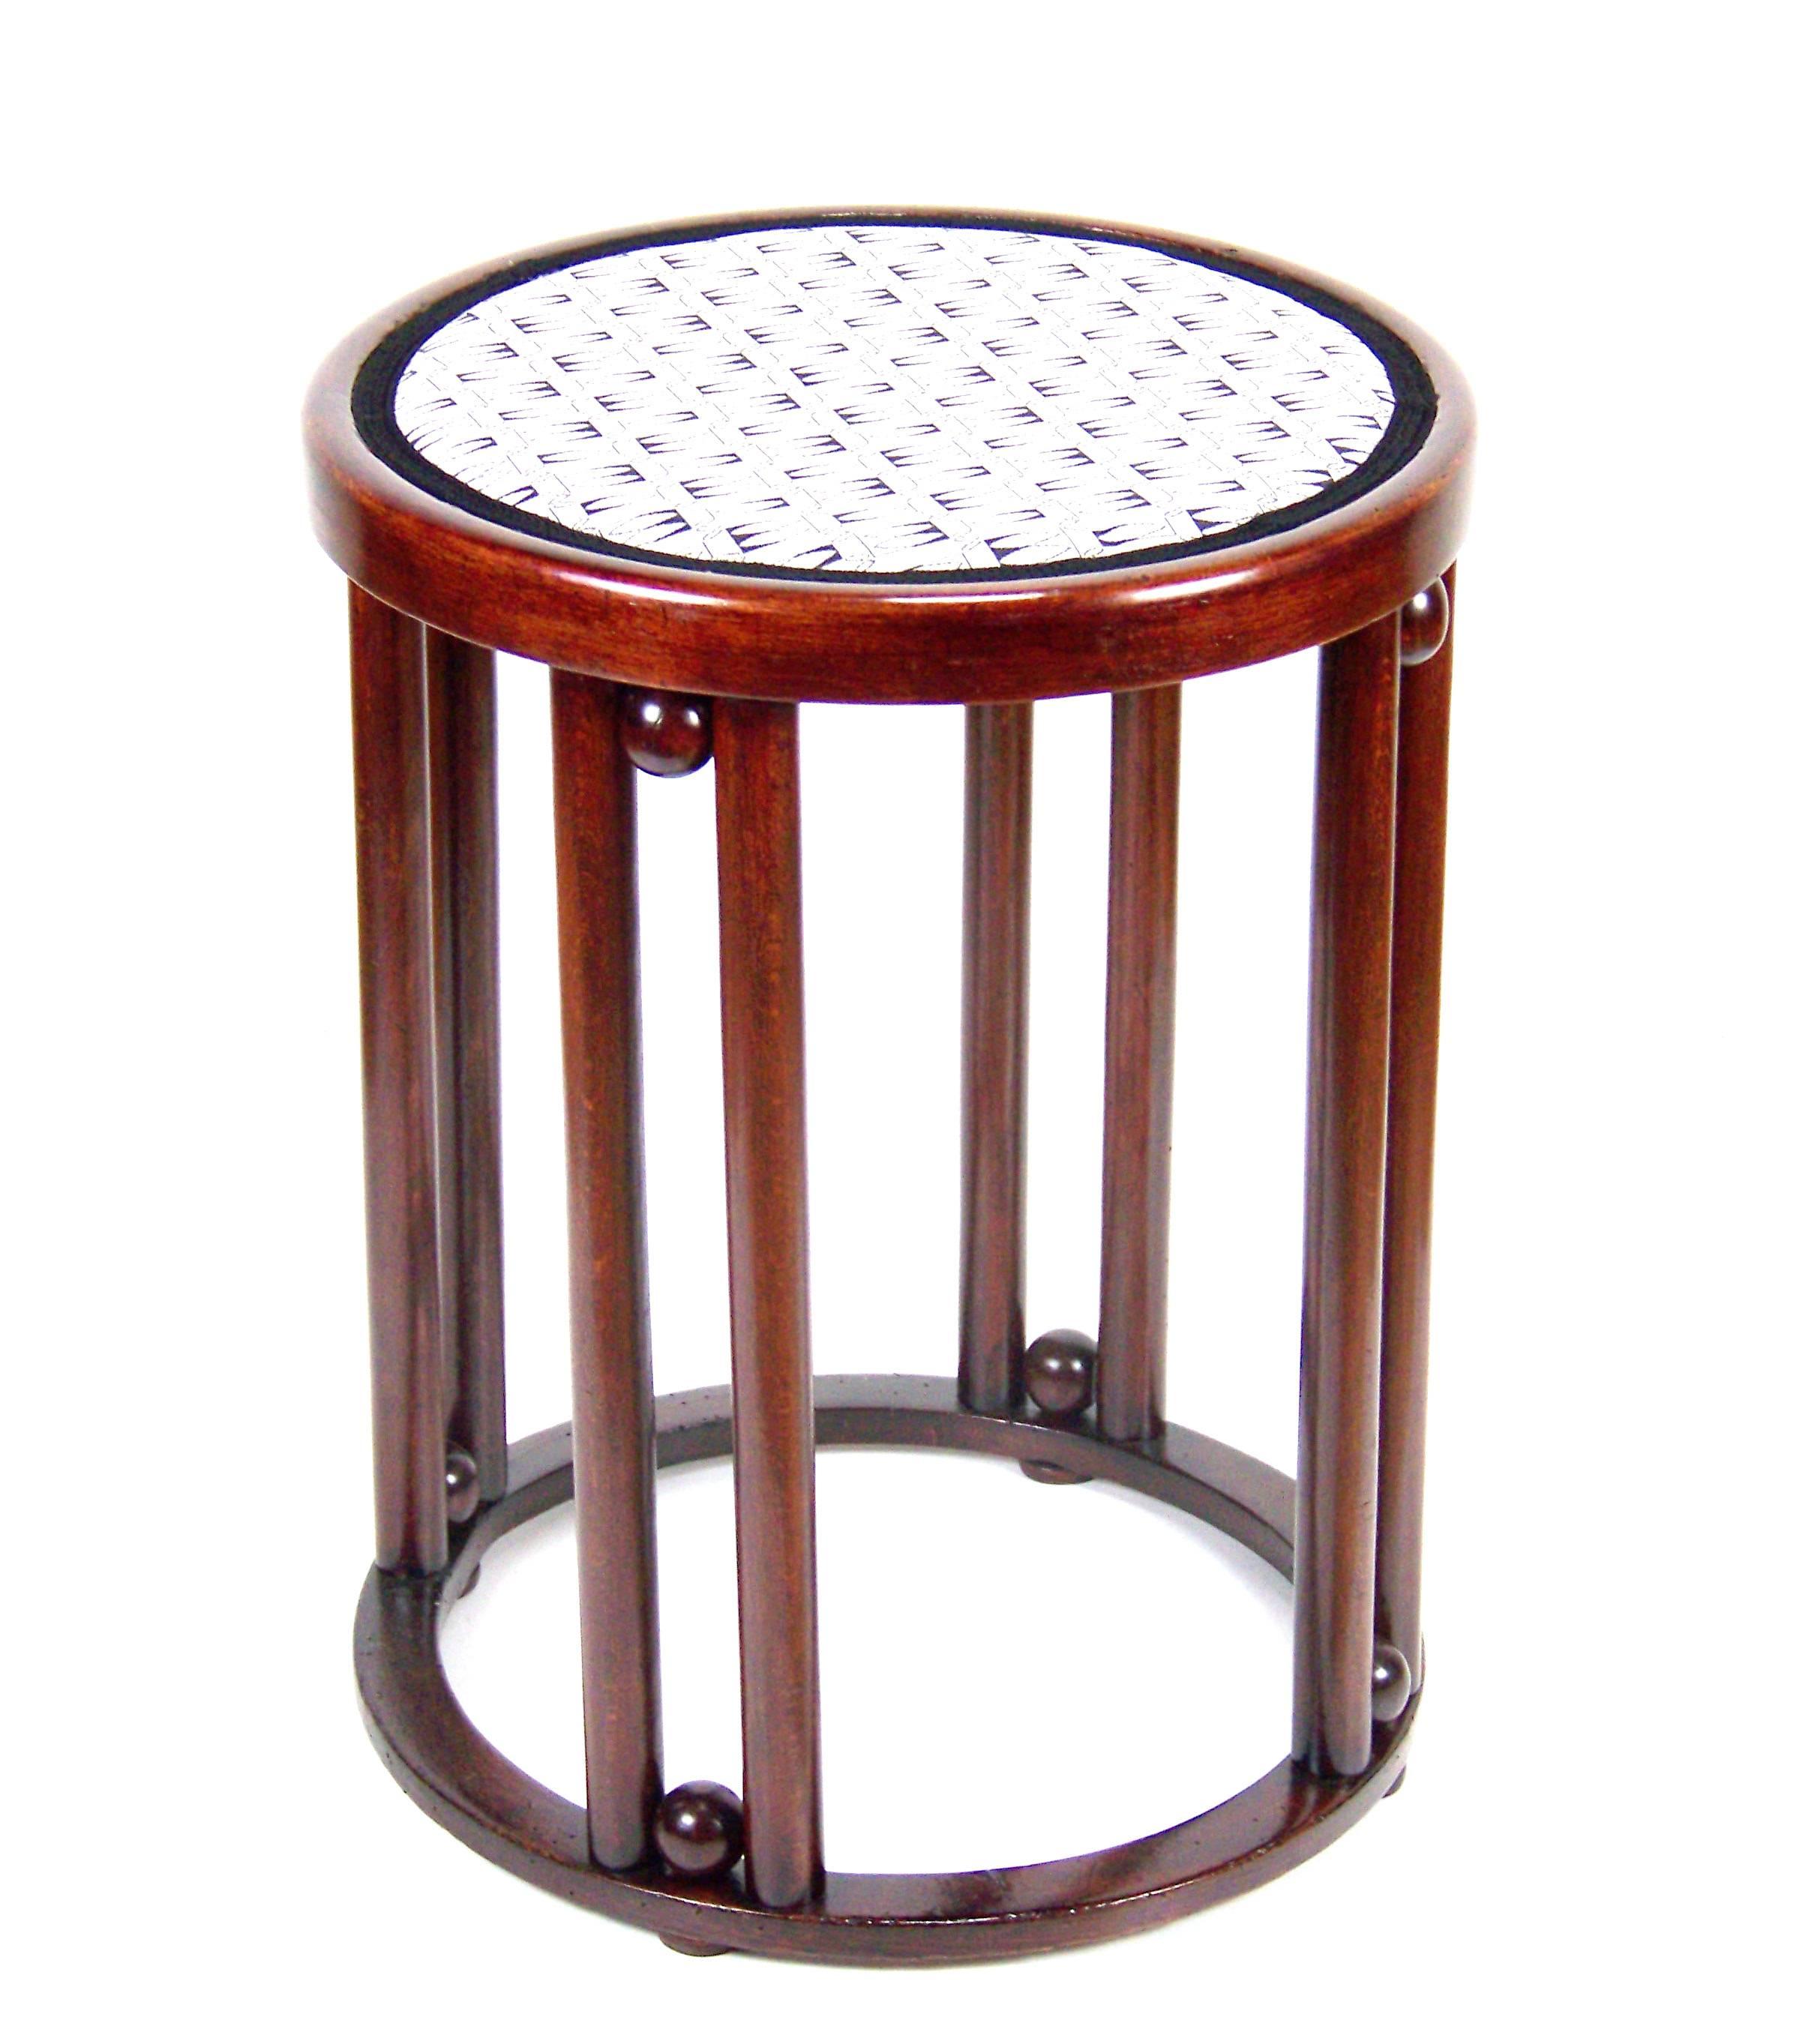 Viennese secession stool Nr.728 was designed by Josef Hoffmann for company Jacob & Josef Kohn circa year 1905. In year 1907 was these furniture model used in the famous Viennese café Fledermaus. Newly restored, handmade shellack finish. New polstery